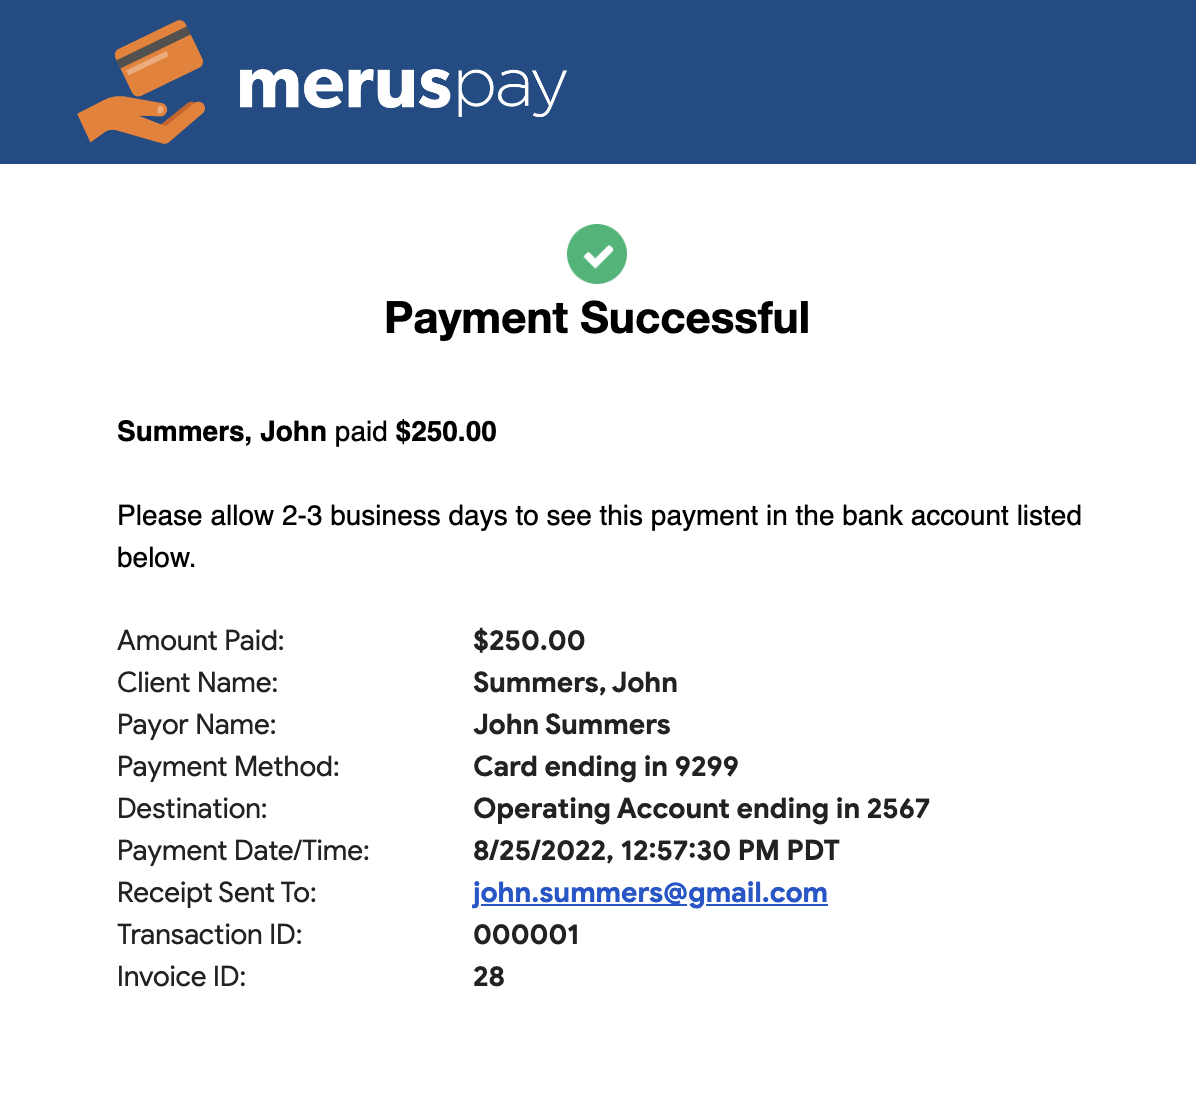 MerusPay Payment Received Email